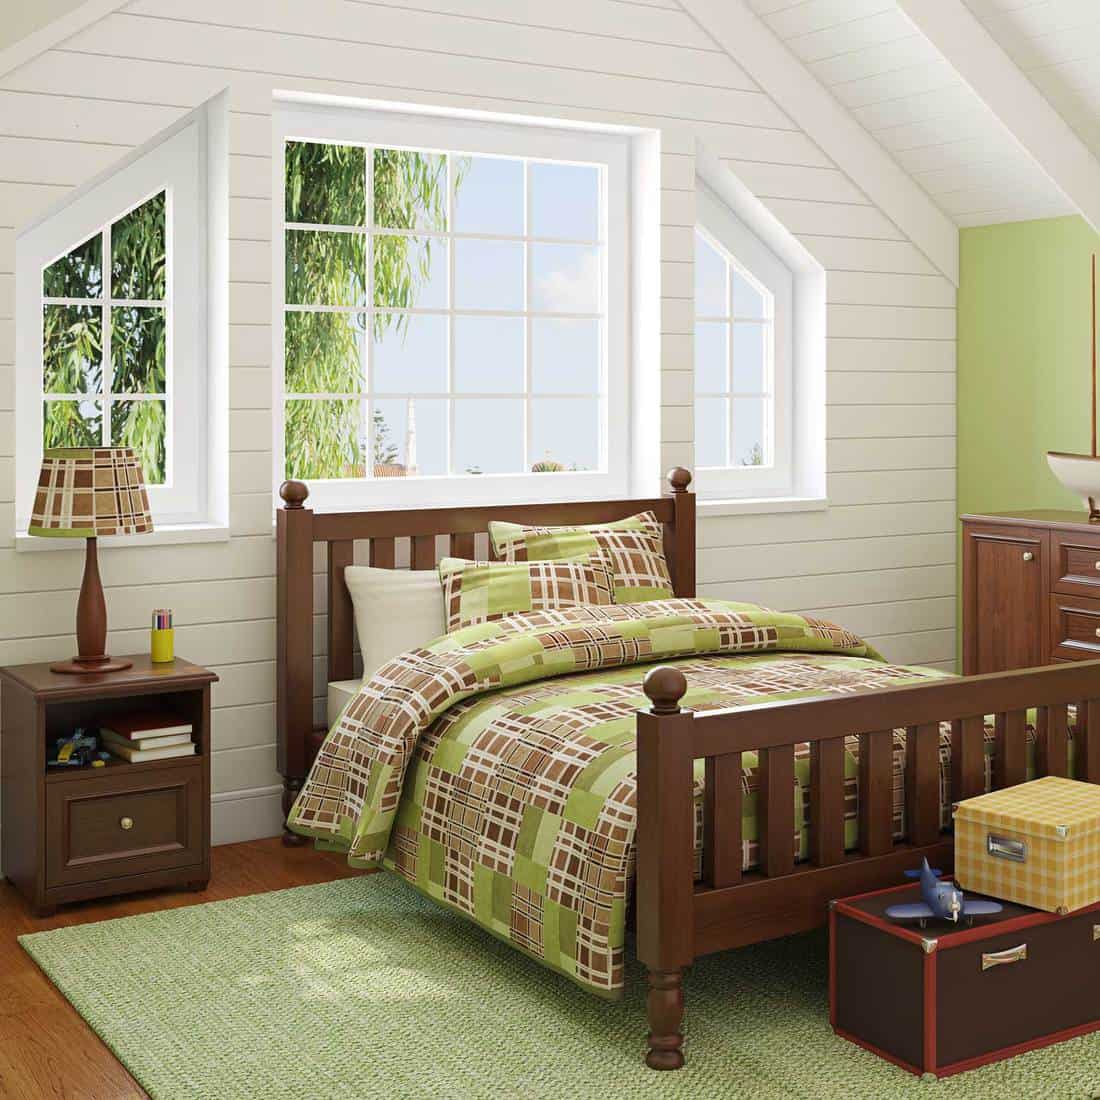 Green themed boys bedroom with wooden furniture and bed beside the window